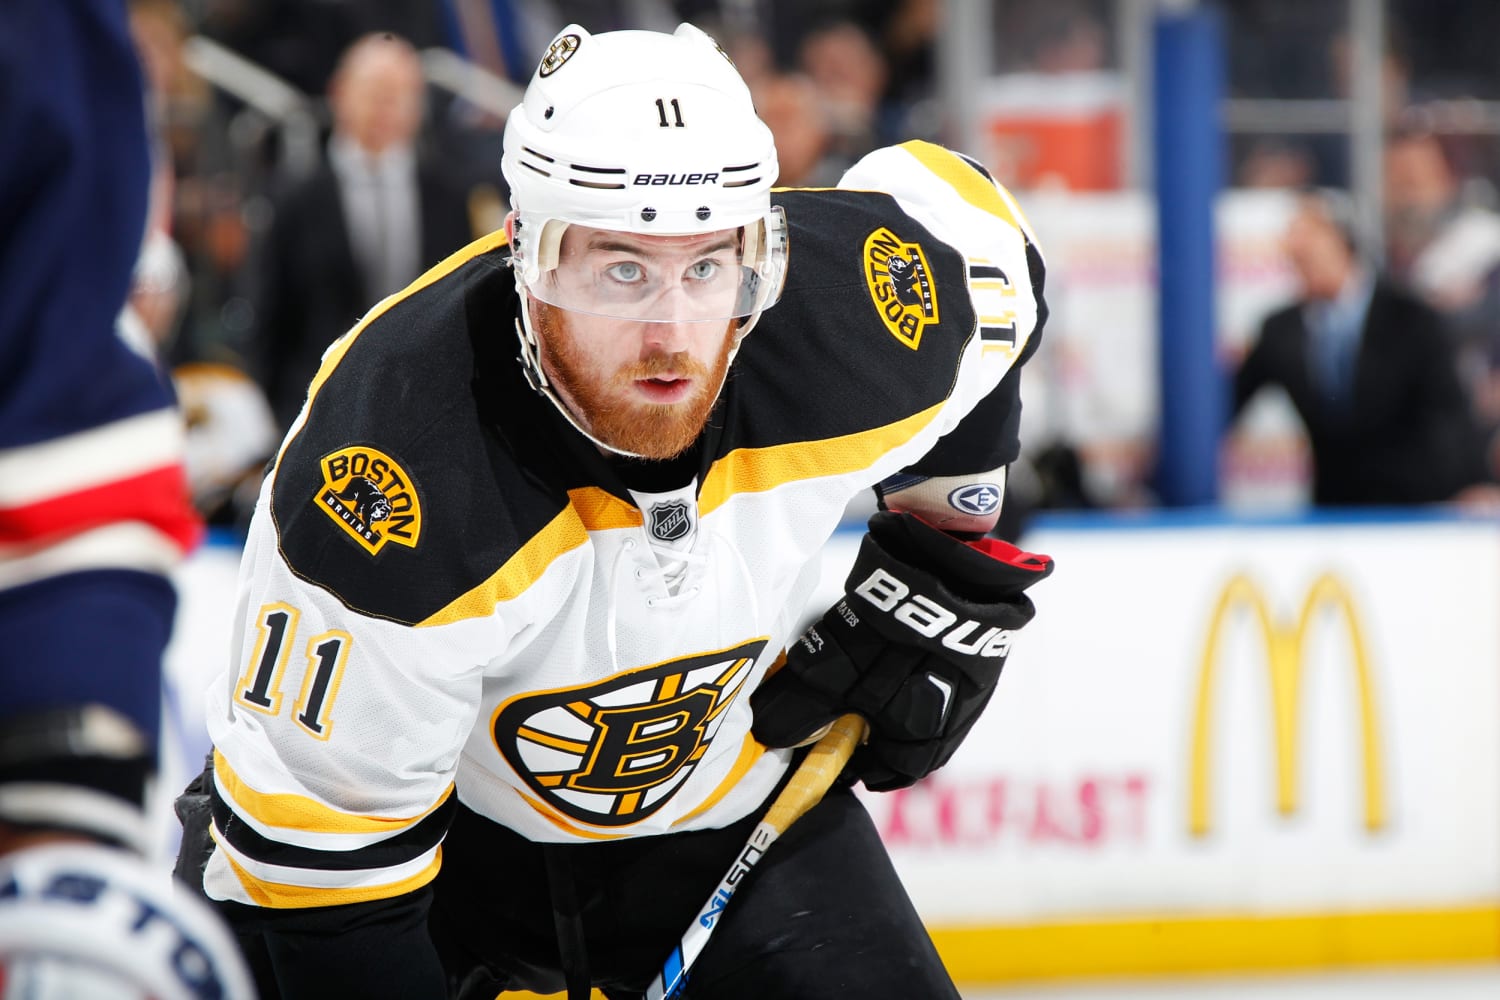 Jimmy Hayes dies at 31: Former NHL forward played for four teams